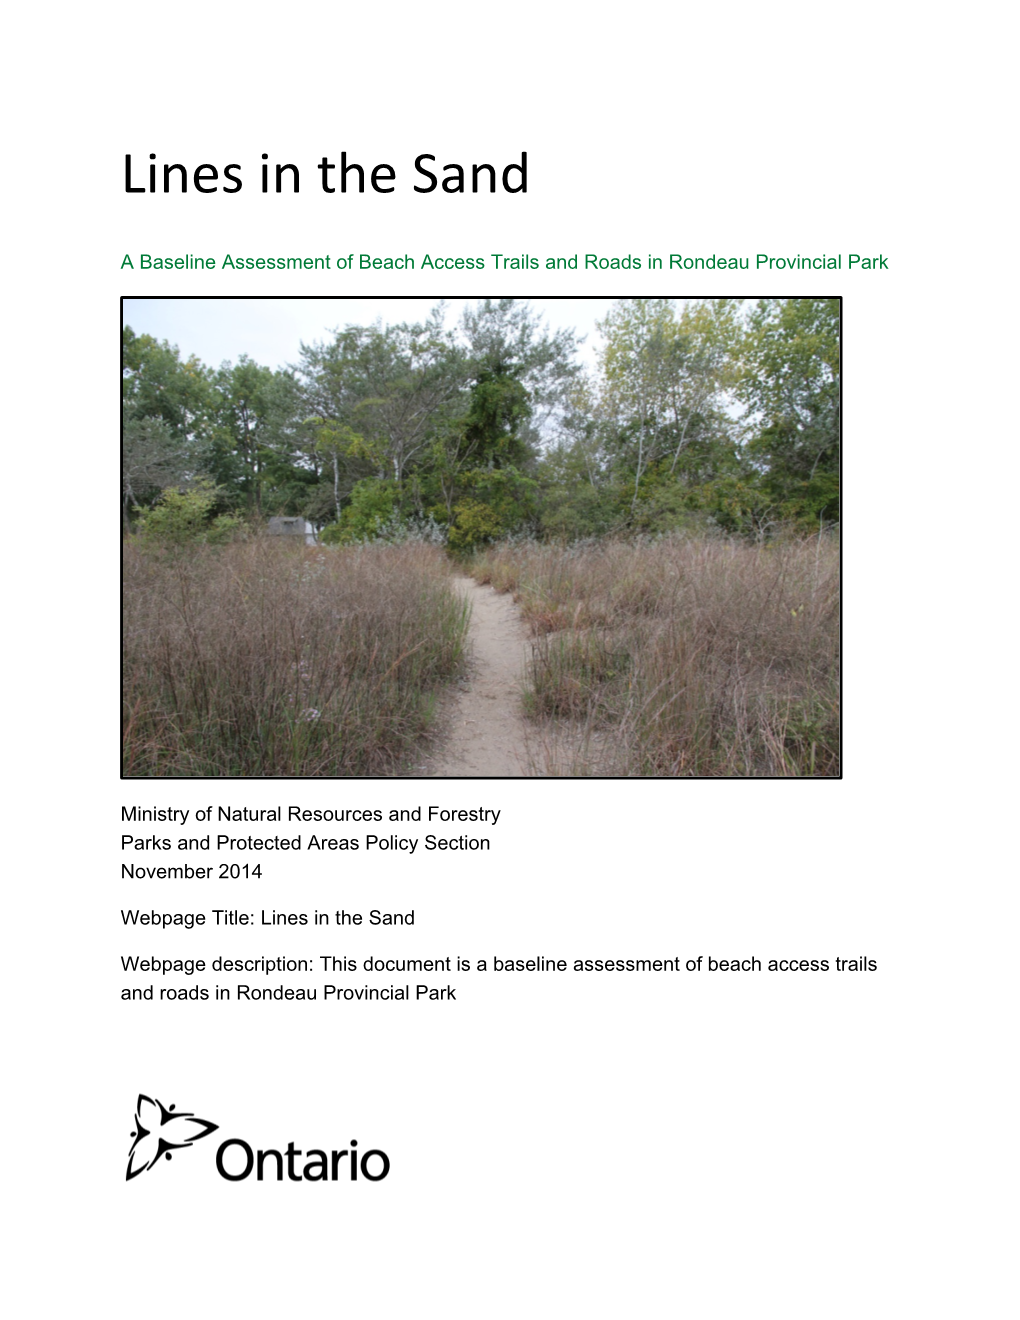 Lines in the Sand Baseline Assessment of Trails in Rondeau